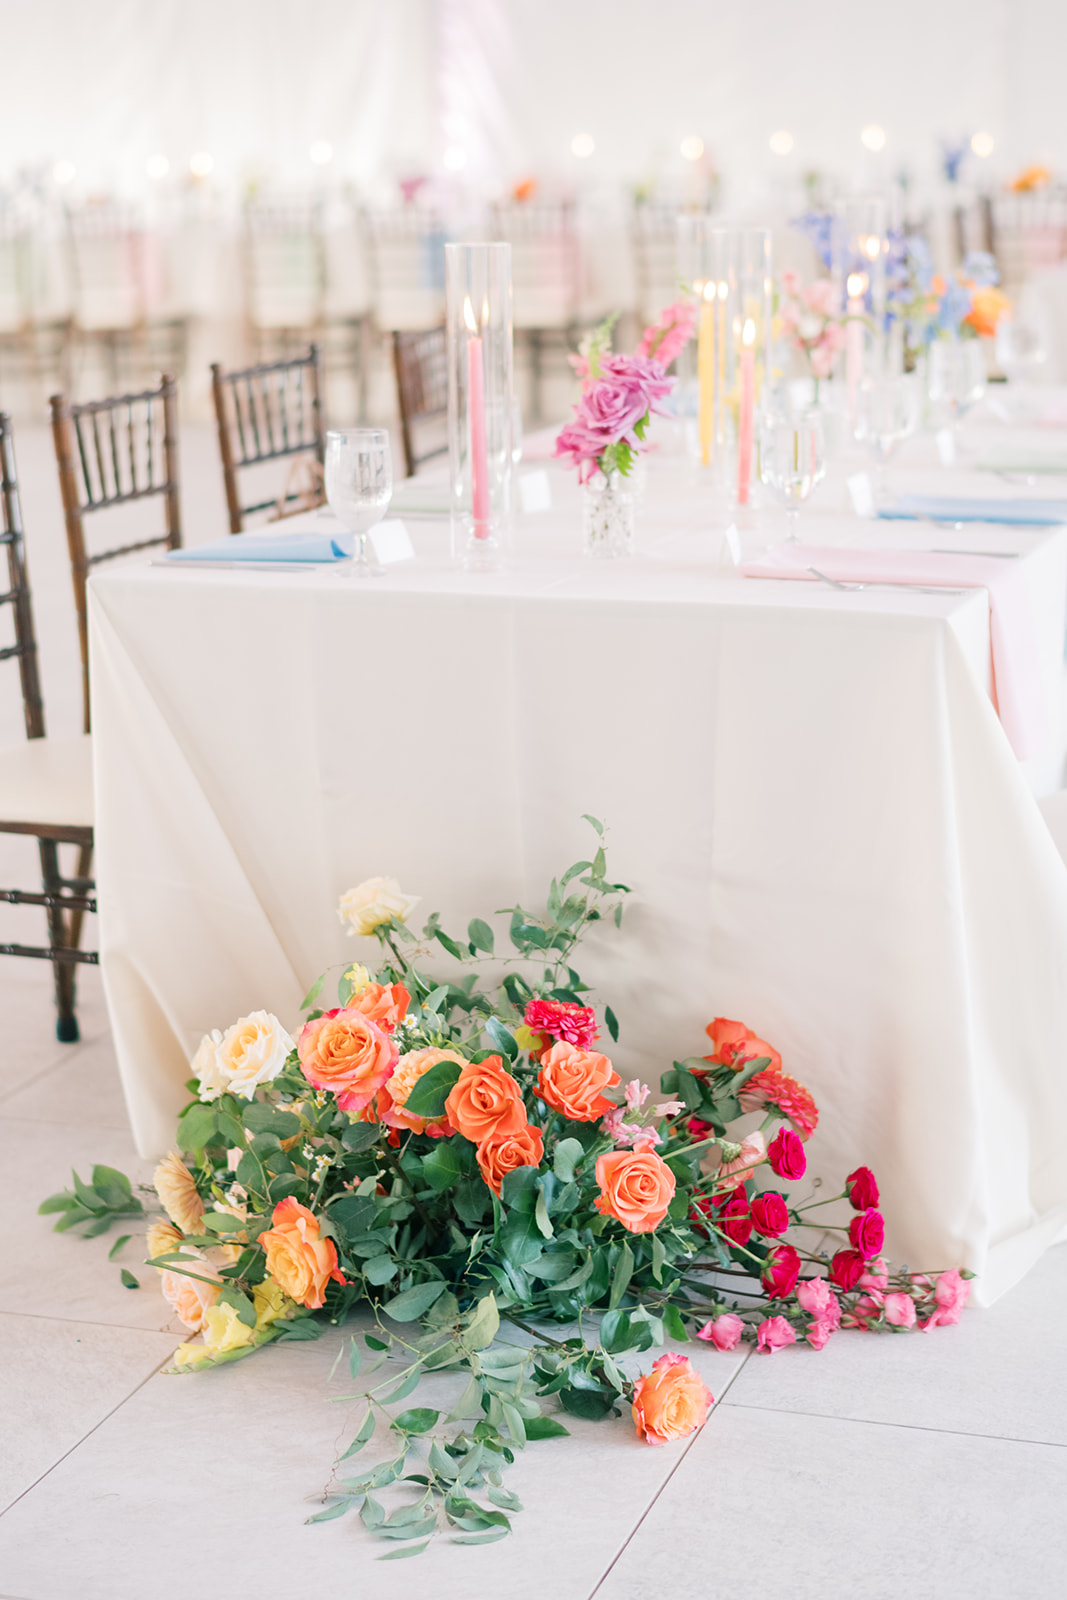 wedding reception with orange and red roses near end of table